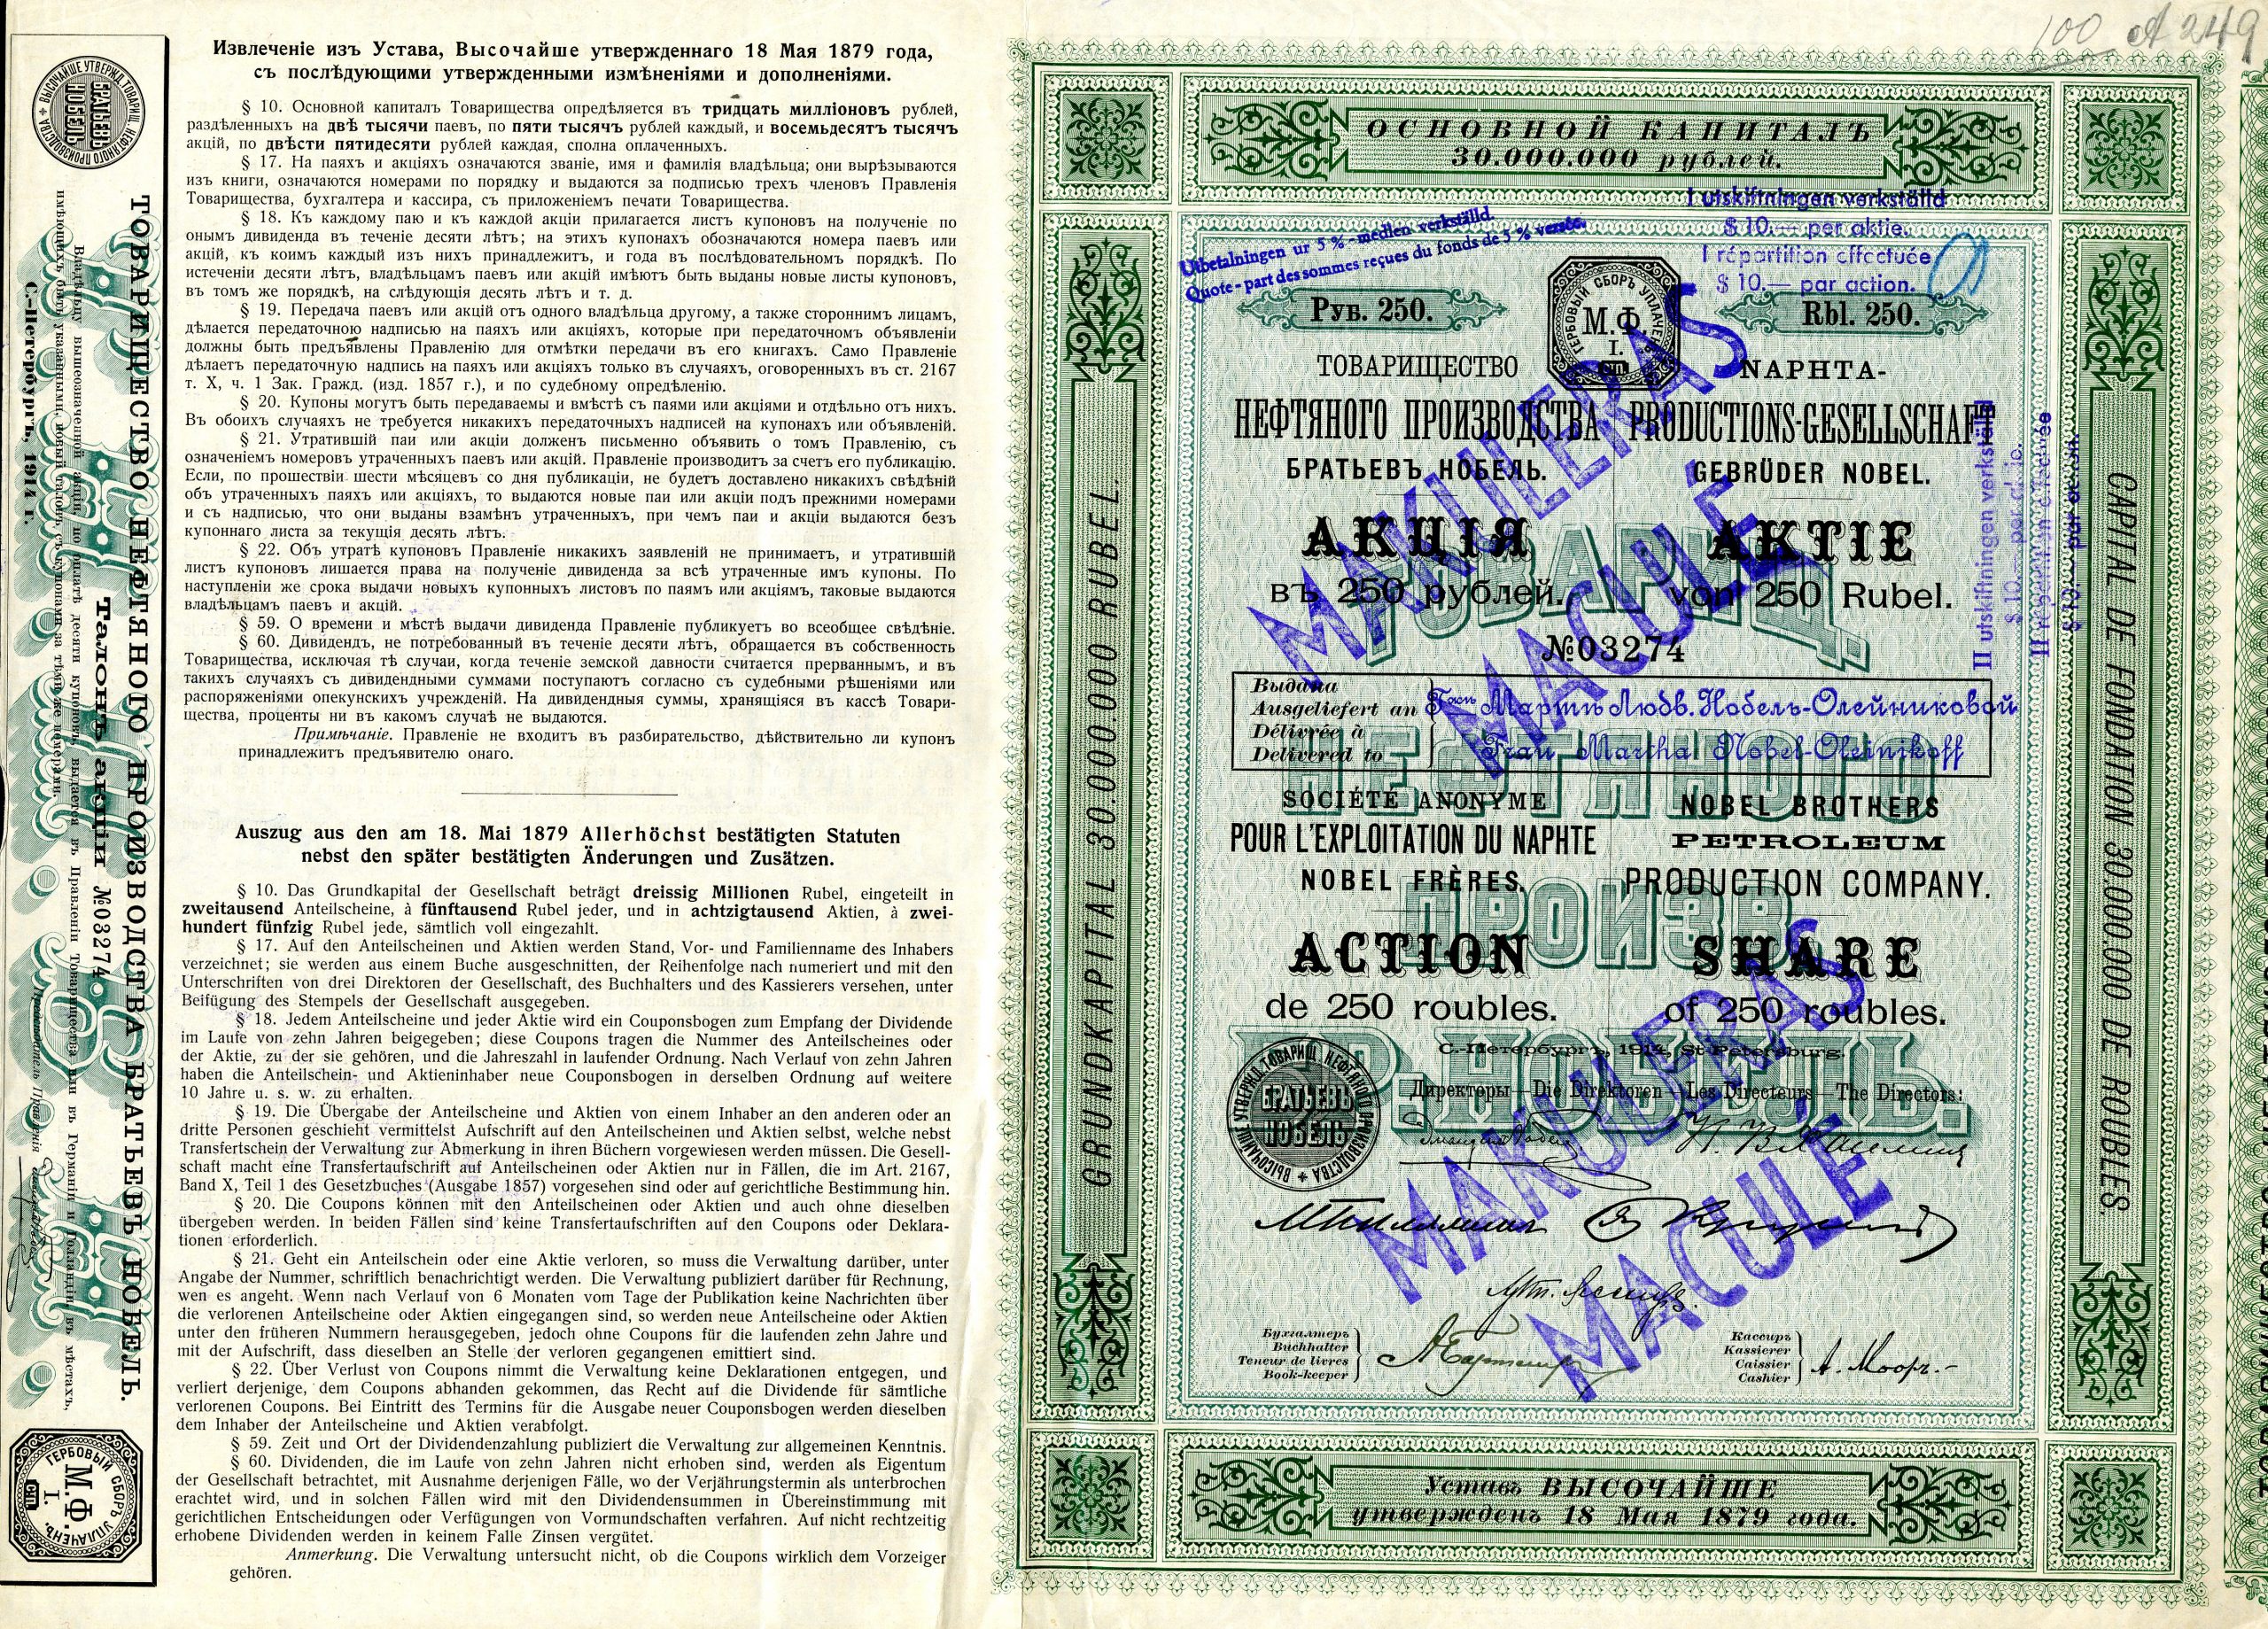 One of the Branobel shares issued in 1914 and canceled a bit after the World War II.